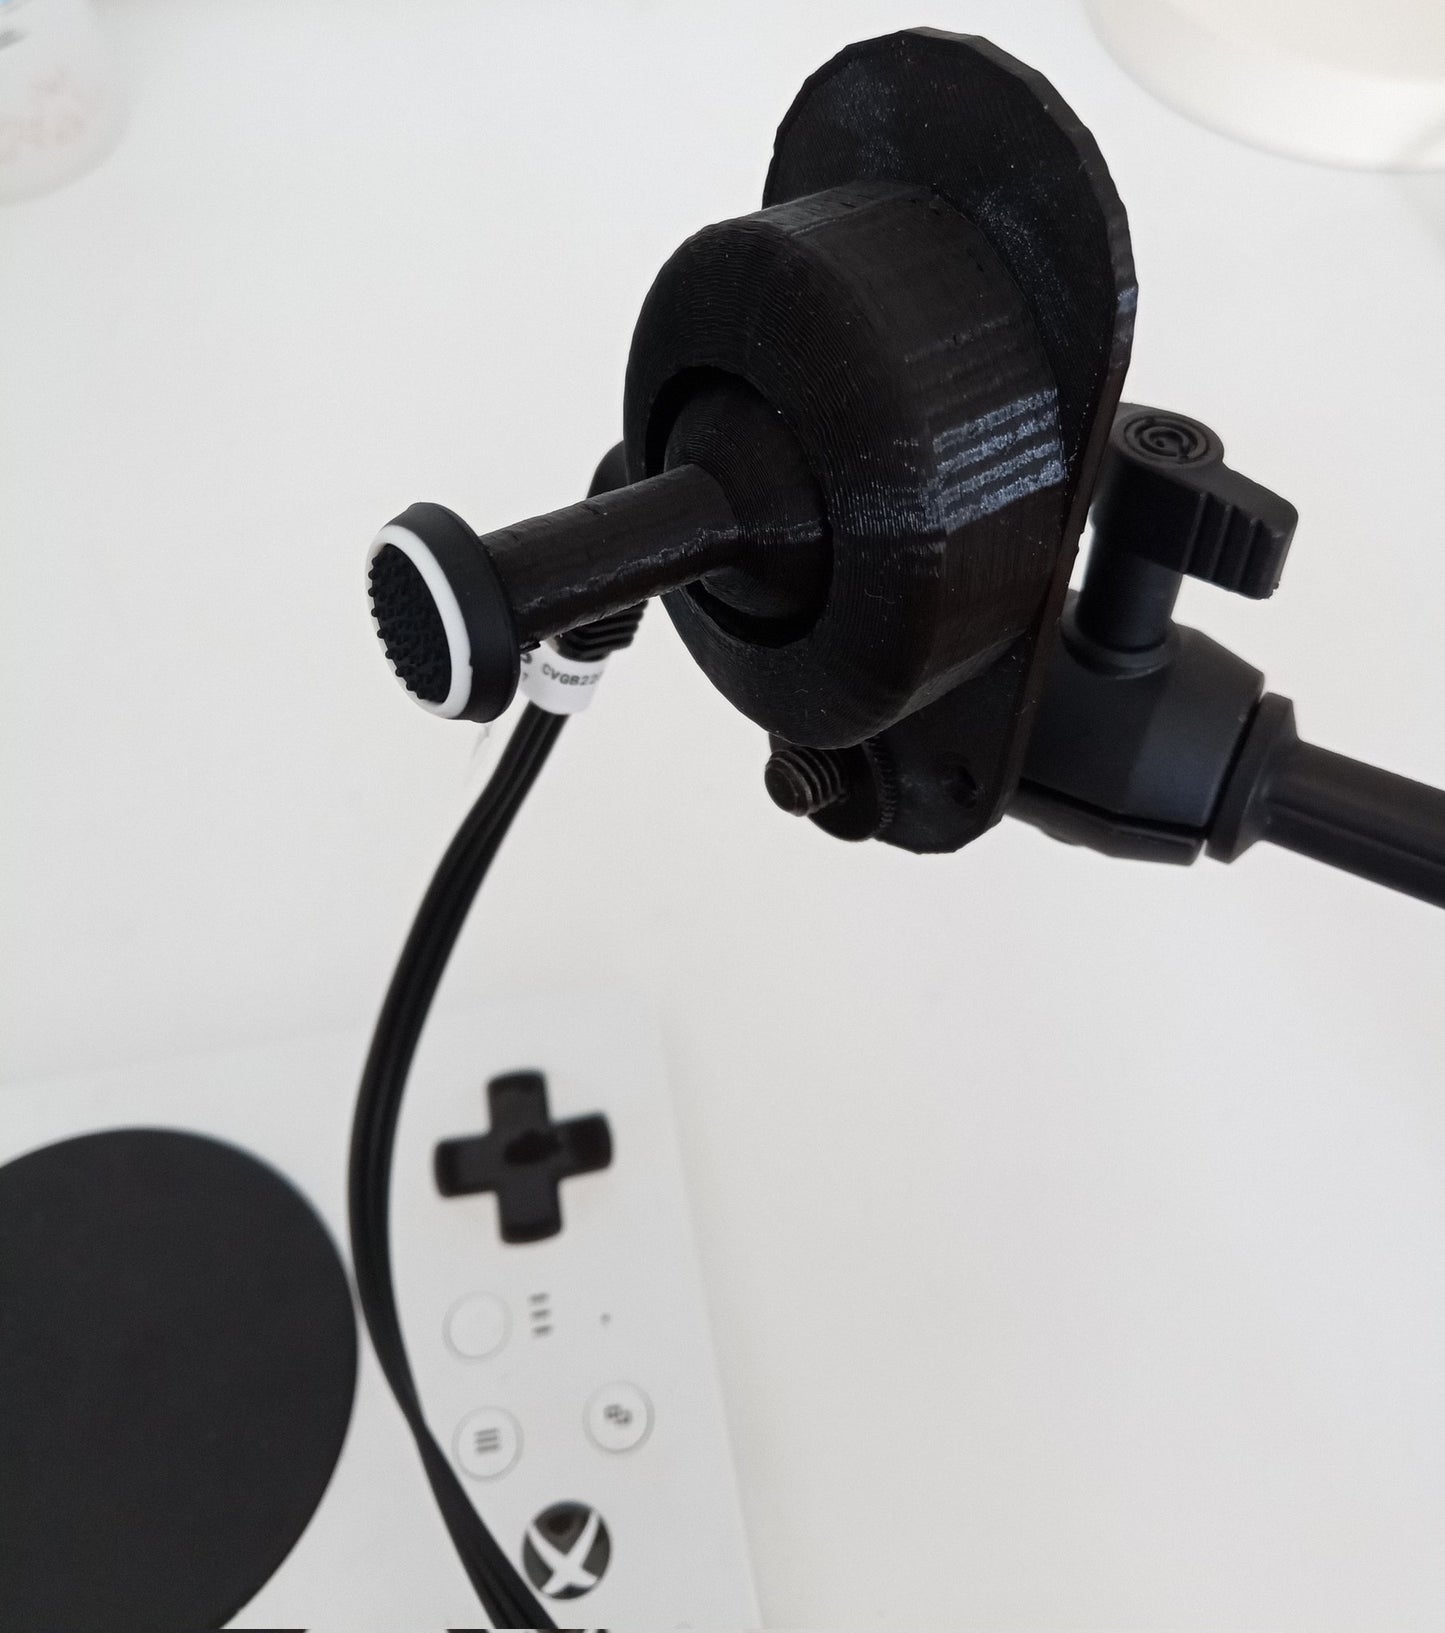 Analogue joystick for mouth - jack socket - with fixing arm 40 cm